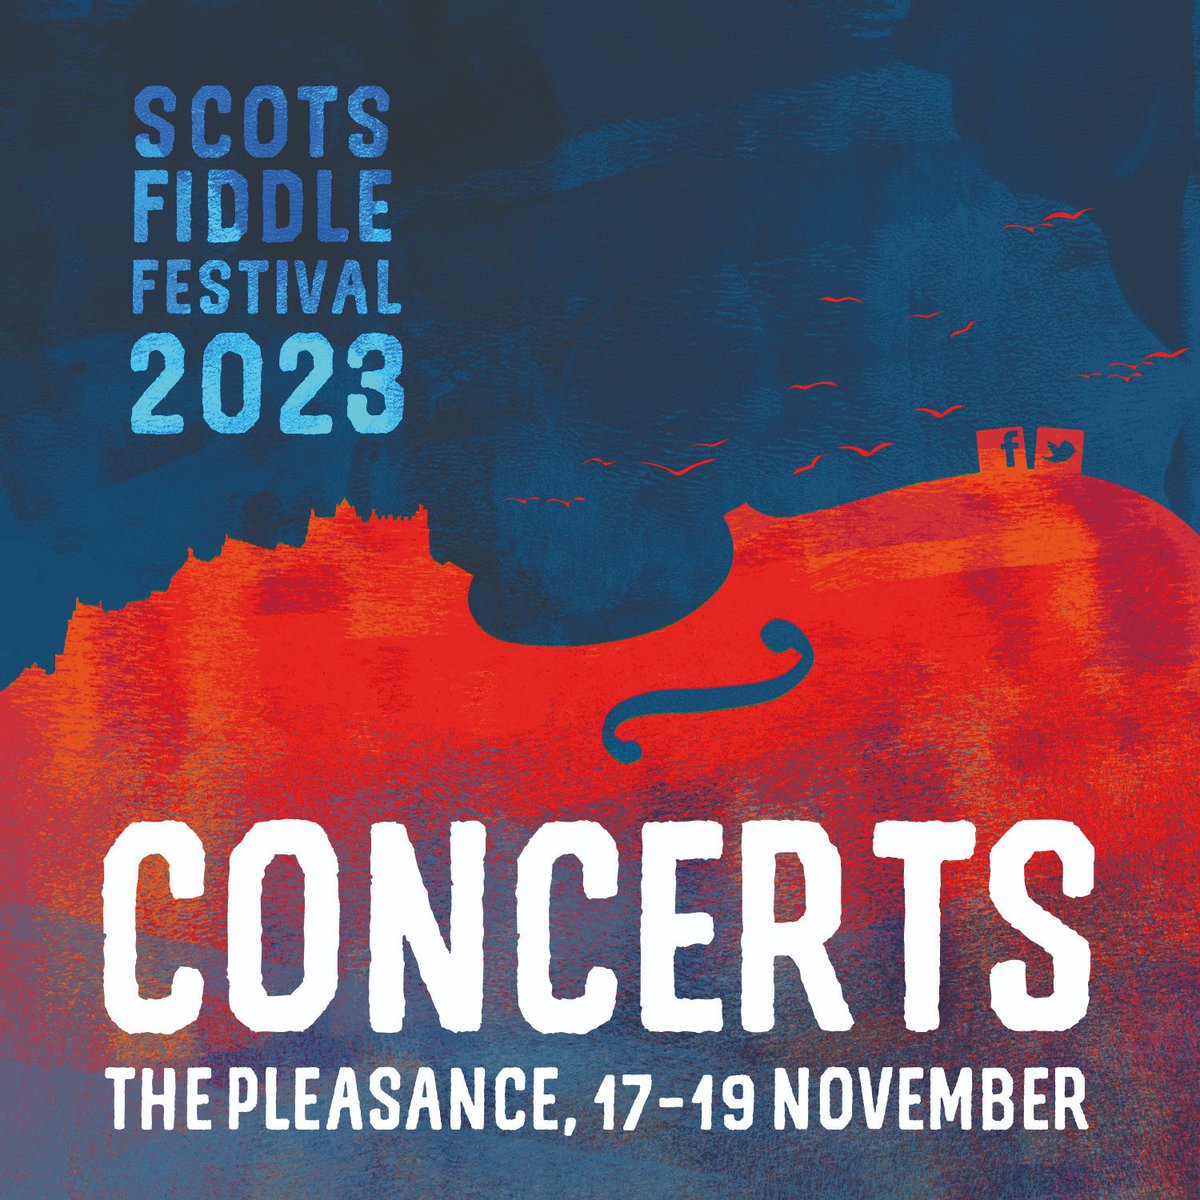 Concerts, you say? We can definitely help with that at this year's #ScotsFiddleFestival! Fri 17 Nov- @Summersfiddle, @juhanisilvola  & @vri_cymru; Sat 18th- @haltadans , @eryn__rae & the young folks from our #YouthEngagementProgramme. Get your tickets: scotsfiddlefestival.com/2023-programme…!